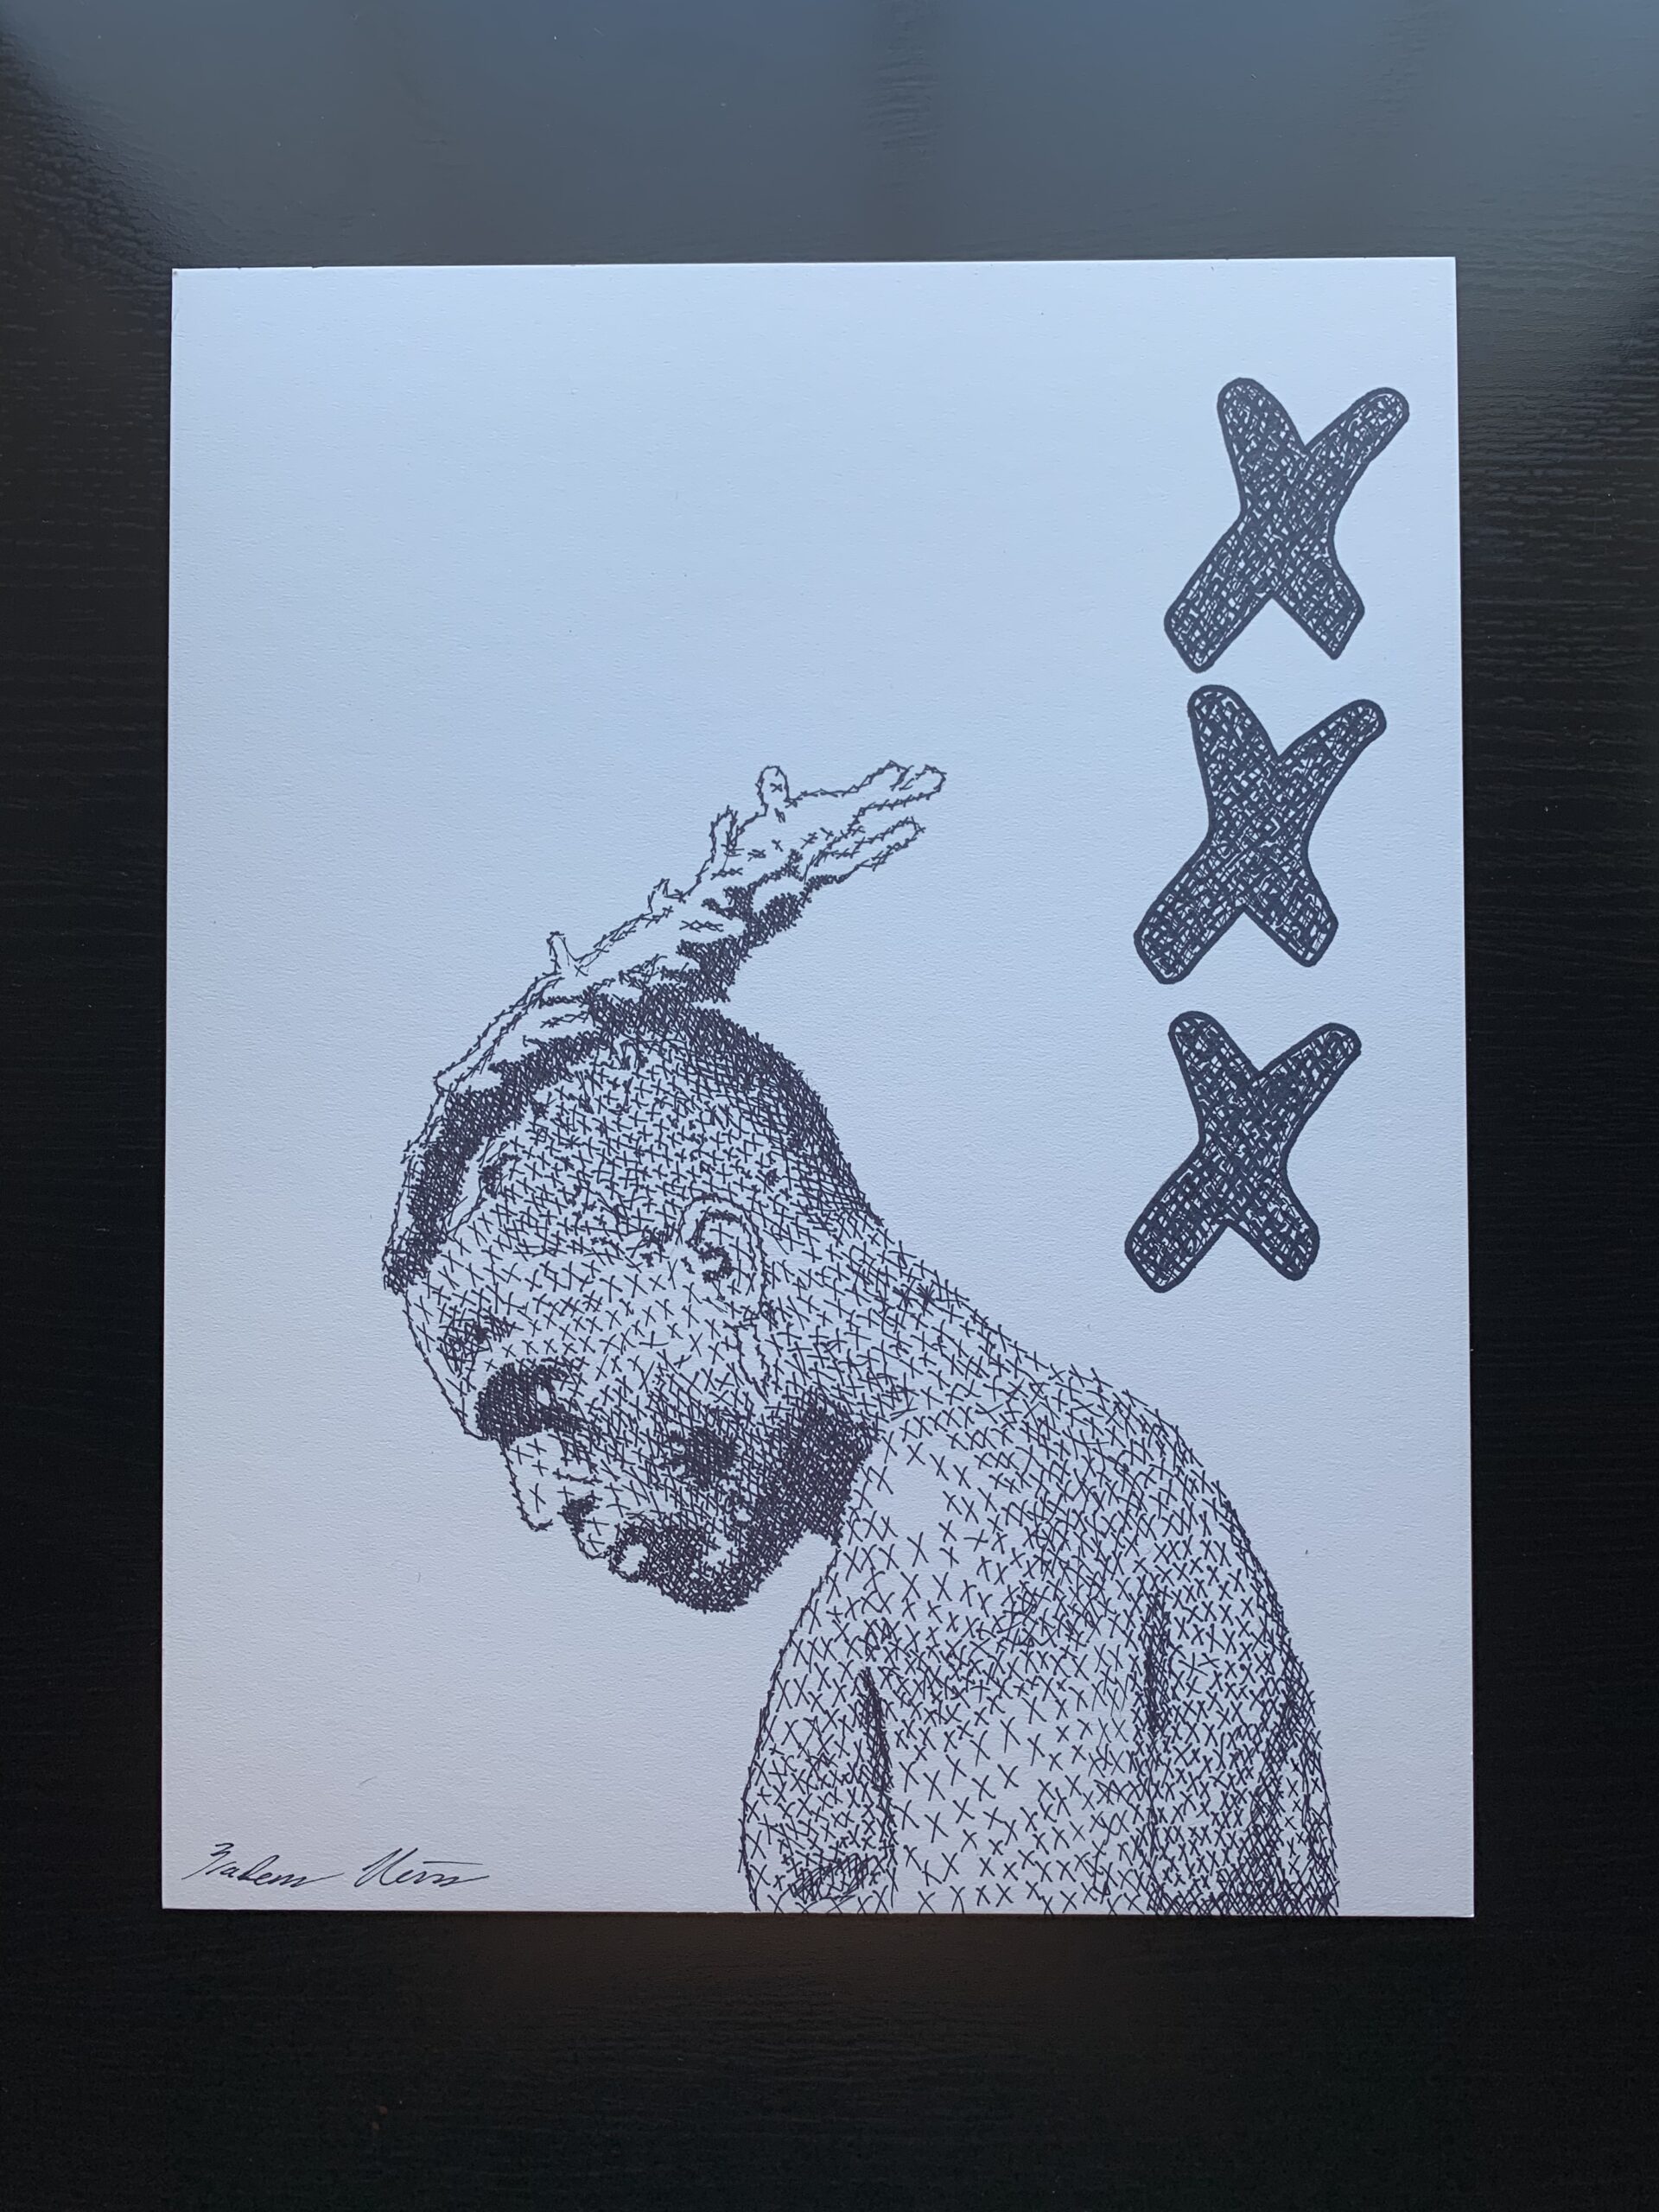 A sharpie drawing of the side profile of a man looking down toward the ground with three "x's" at the top right.